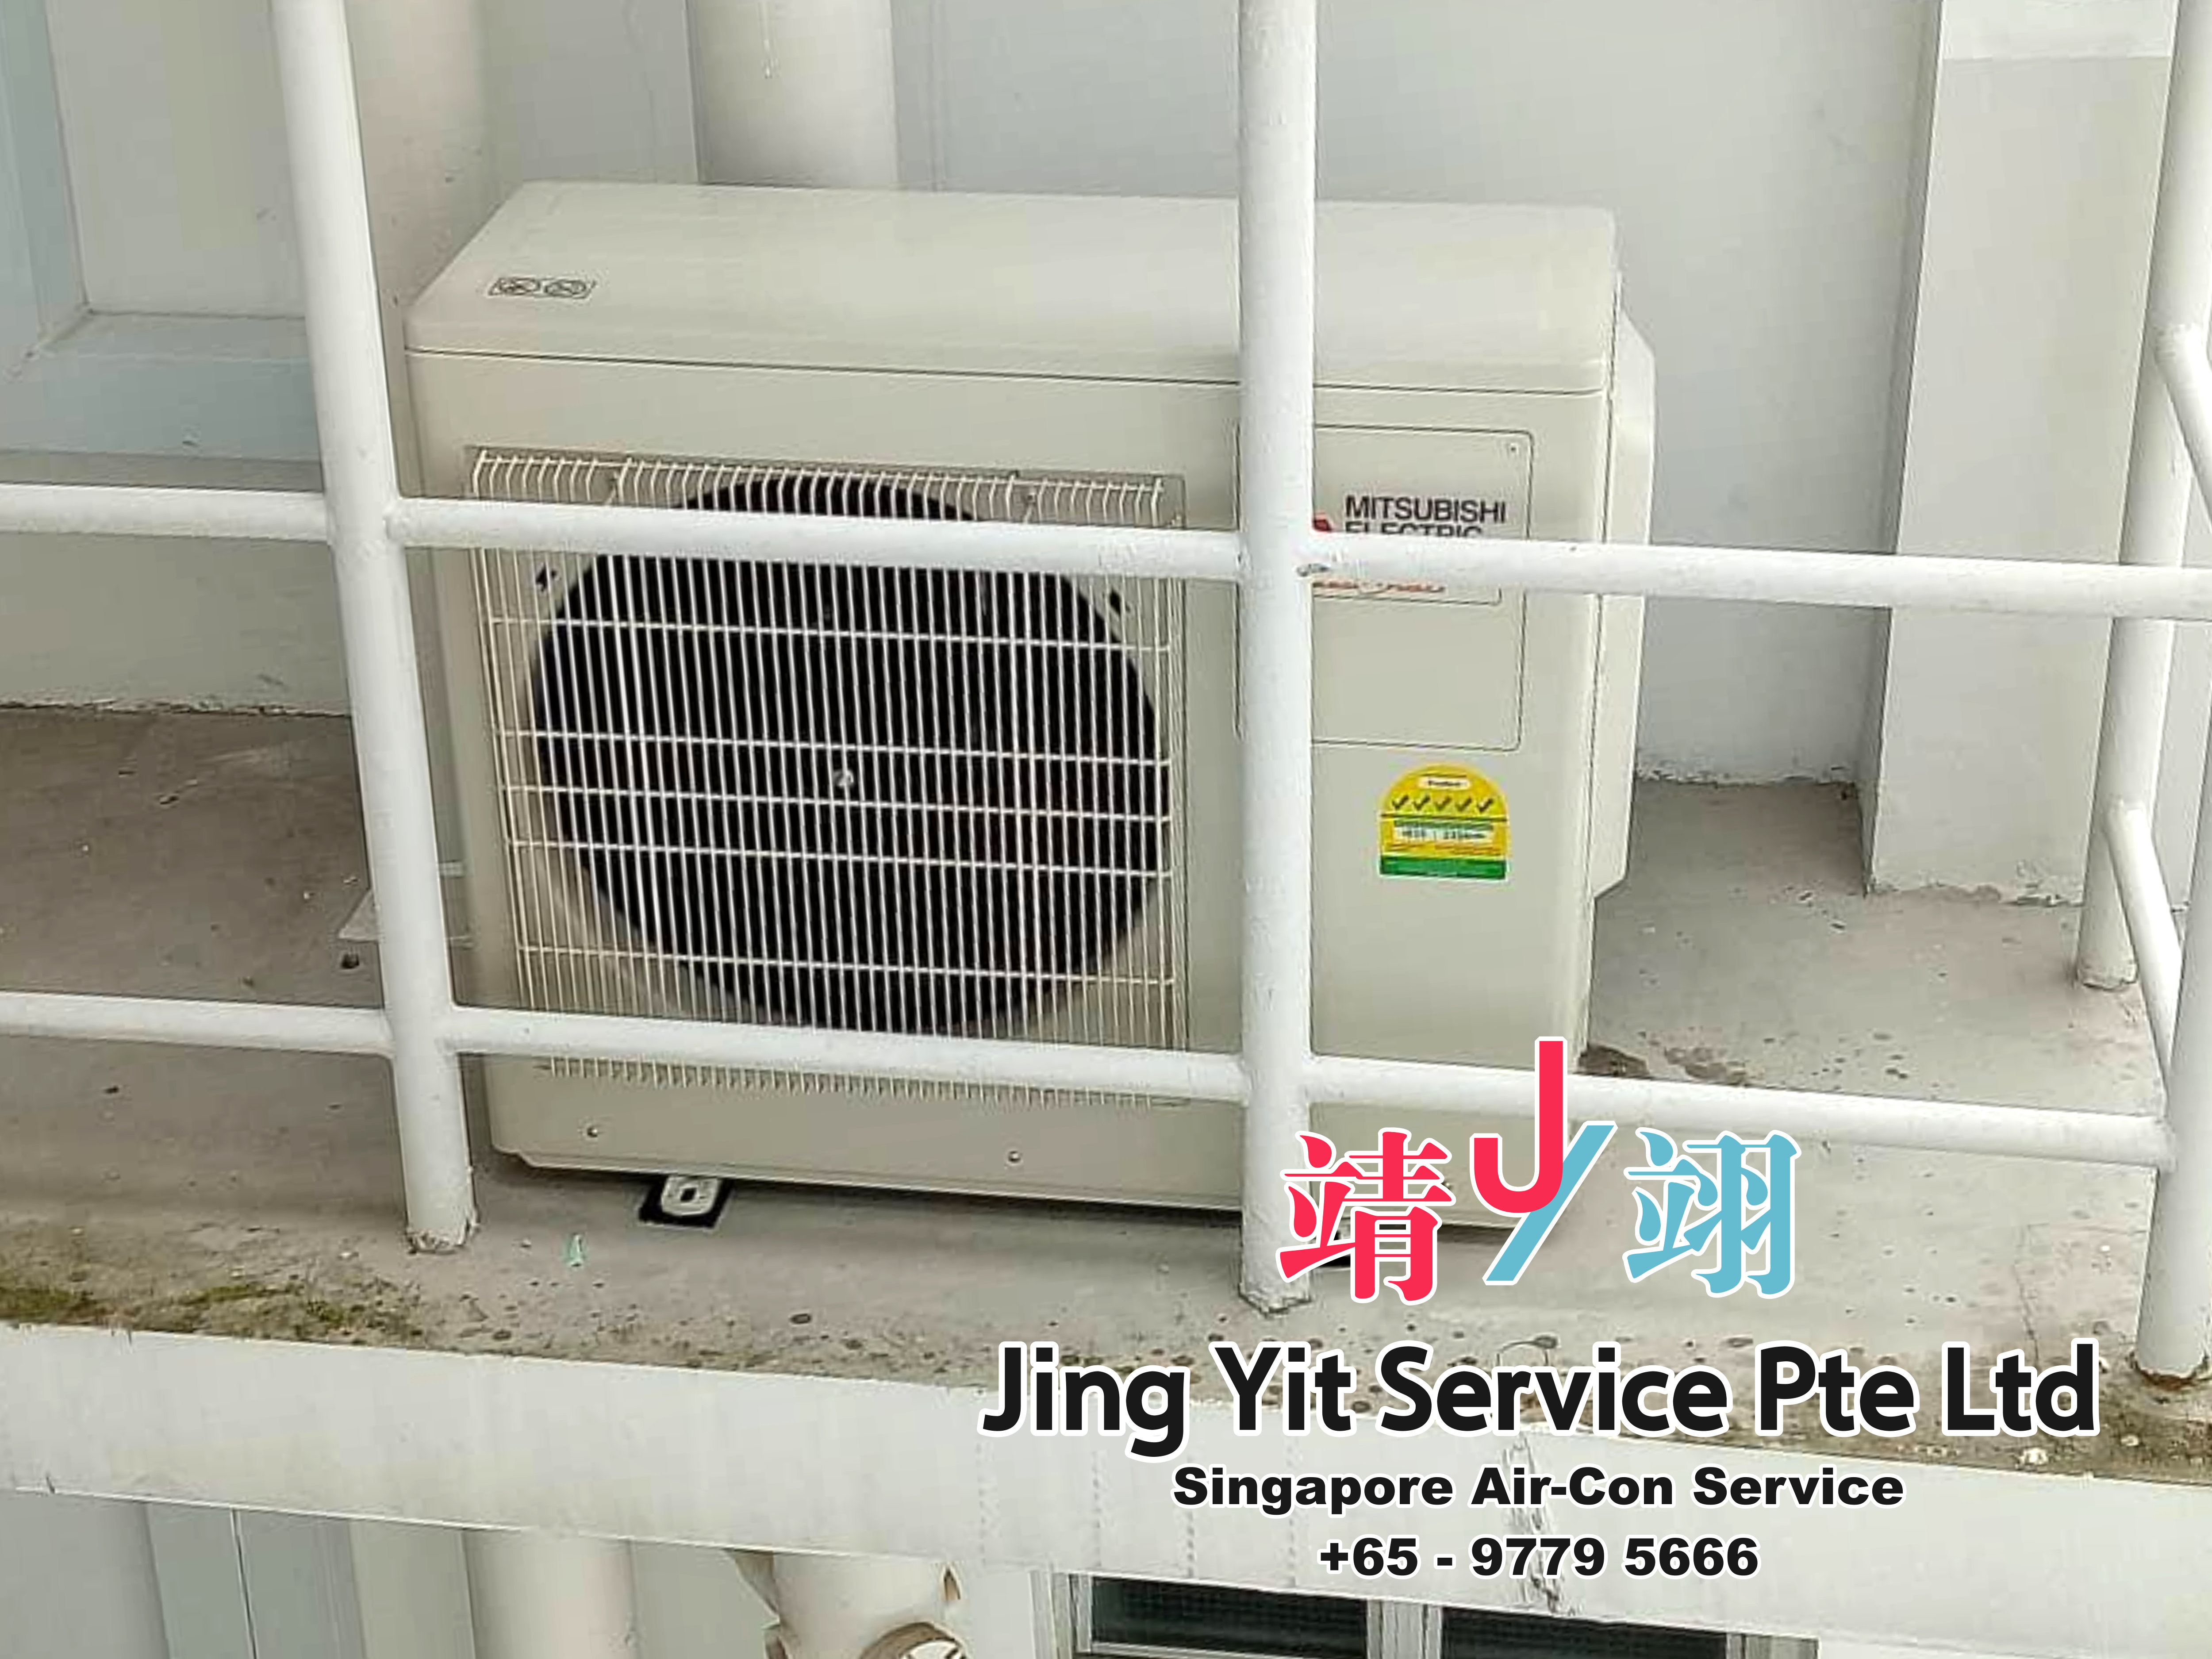 Singapore AirCon Service Air Conditioning Cleaning Repairing and Installation Air-con Gas Refill Aircon Chemical Wash Singapore Jing Yit Service Pte Ltd A03-07